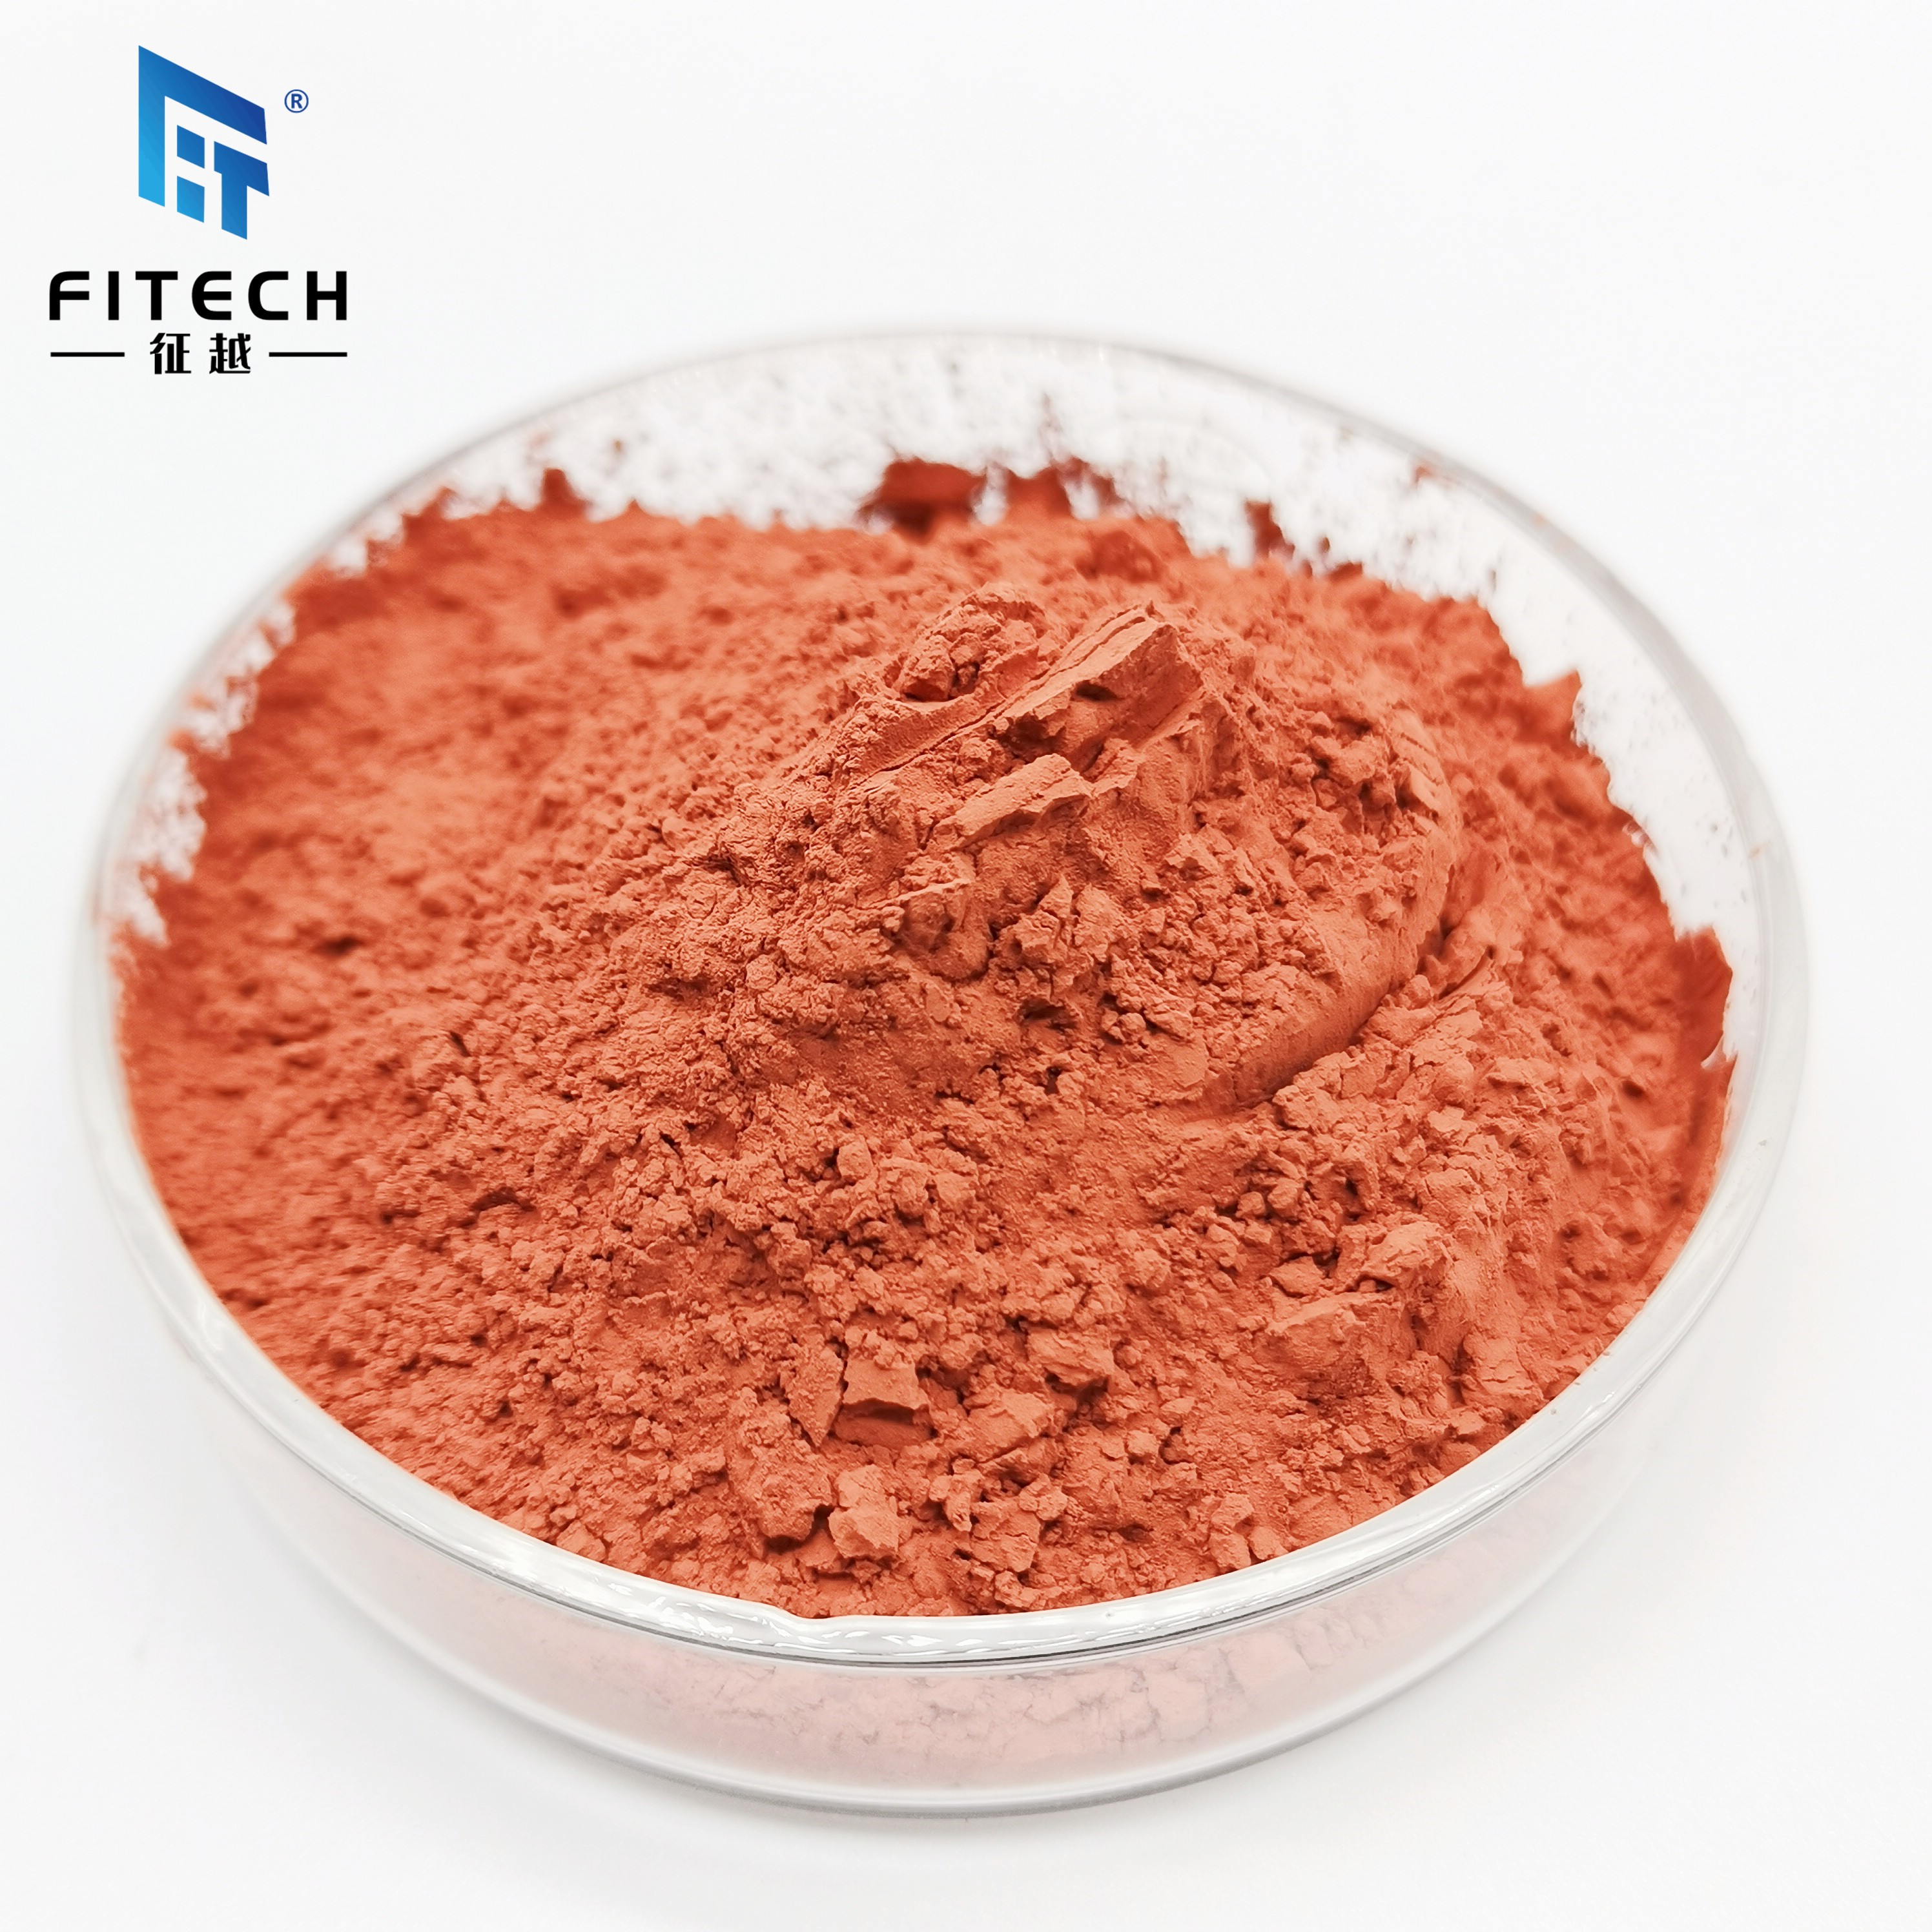 ELECTROLYTIC COPPER POWDER, Products